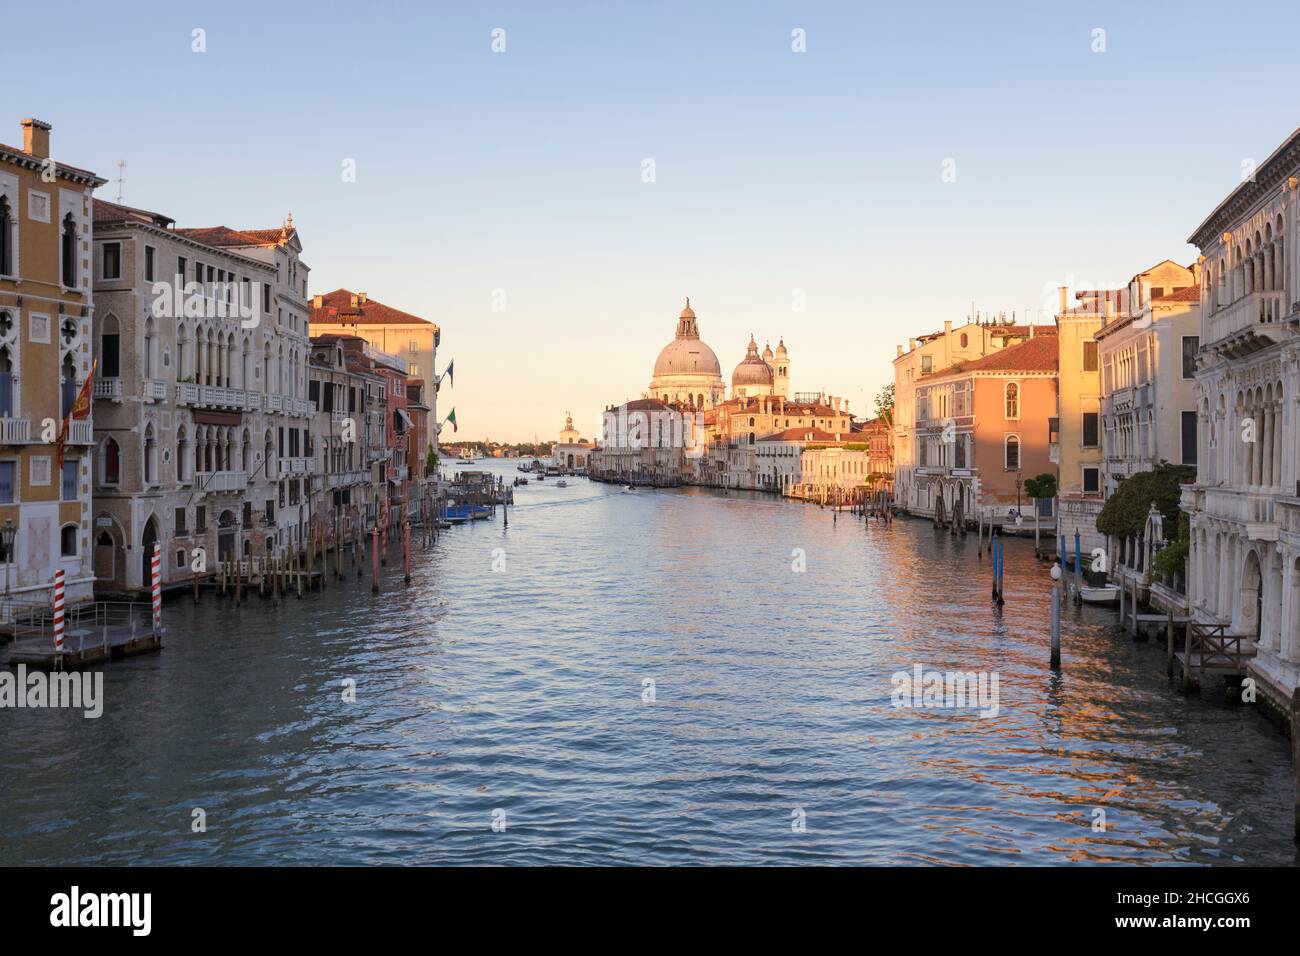 View of Venice with the Grand Canal and Basilica Santa Maria della Salute at dusk, Venice, Italy Stock Photo